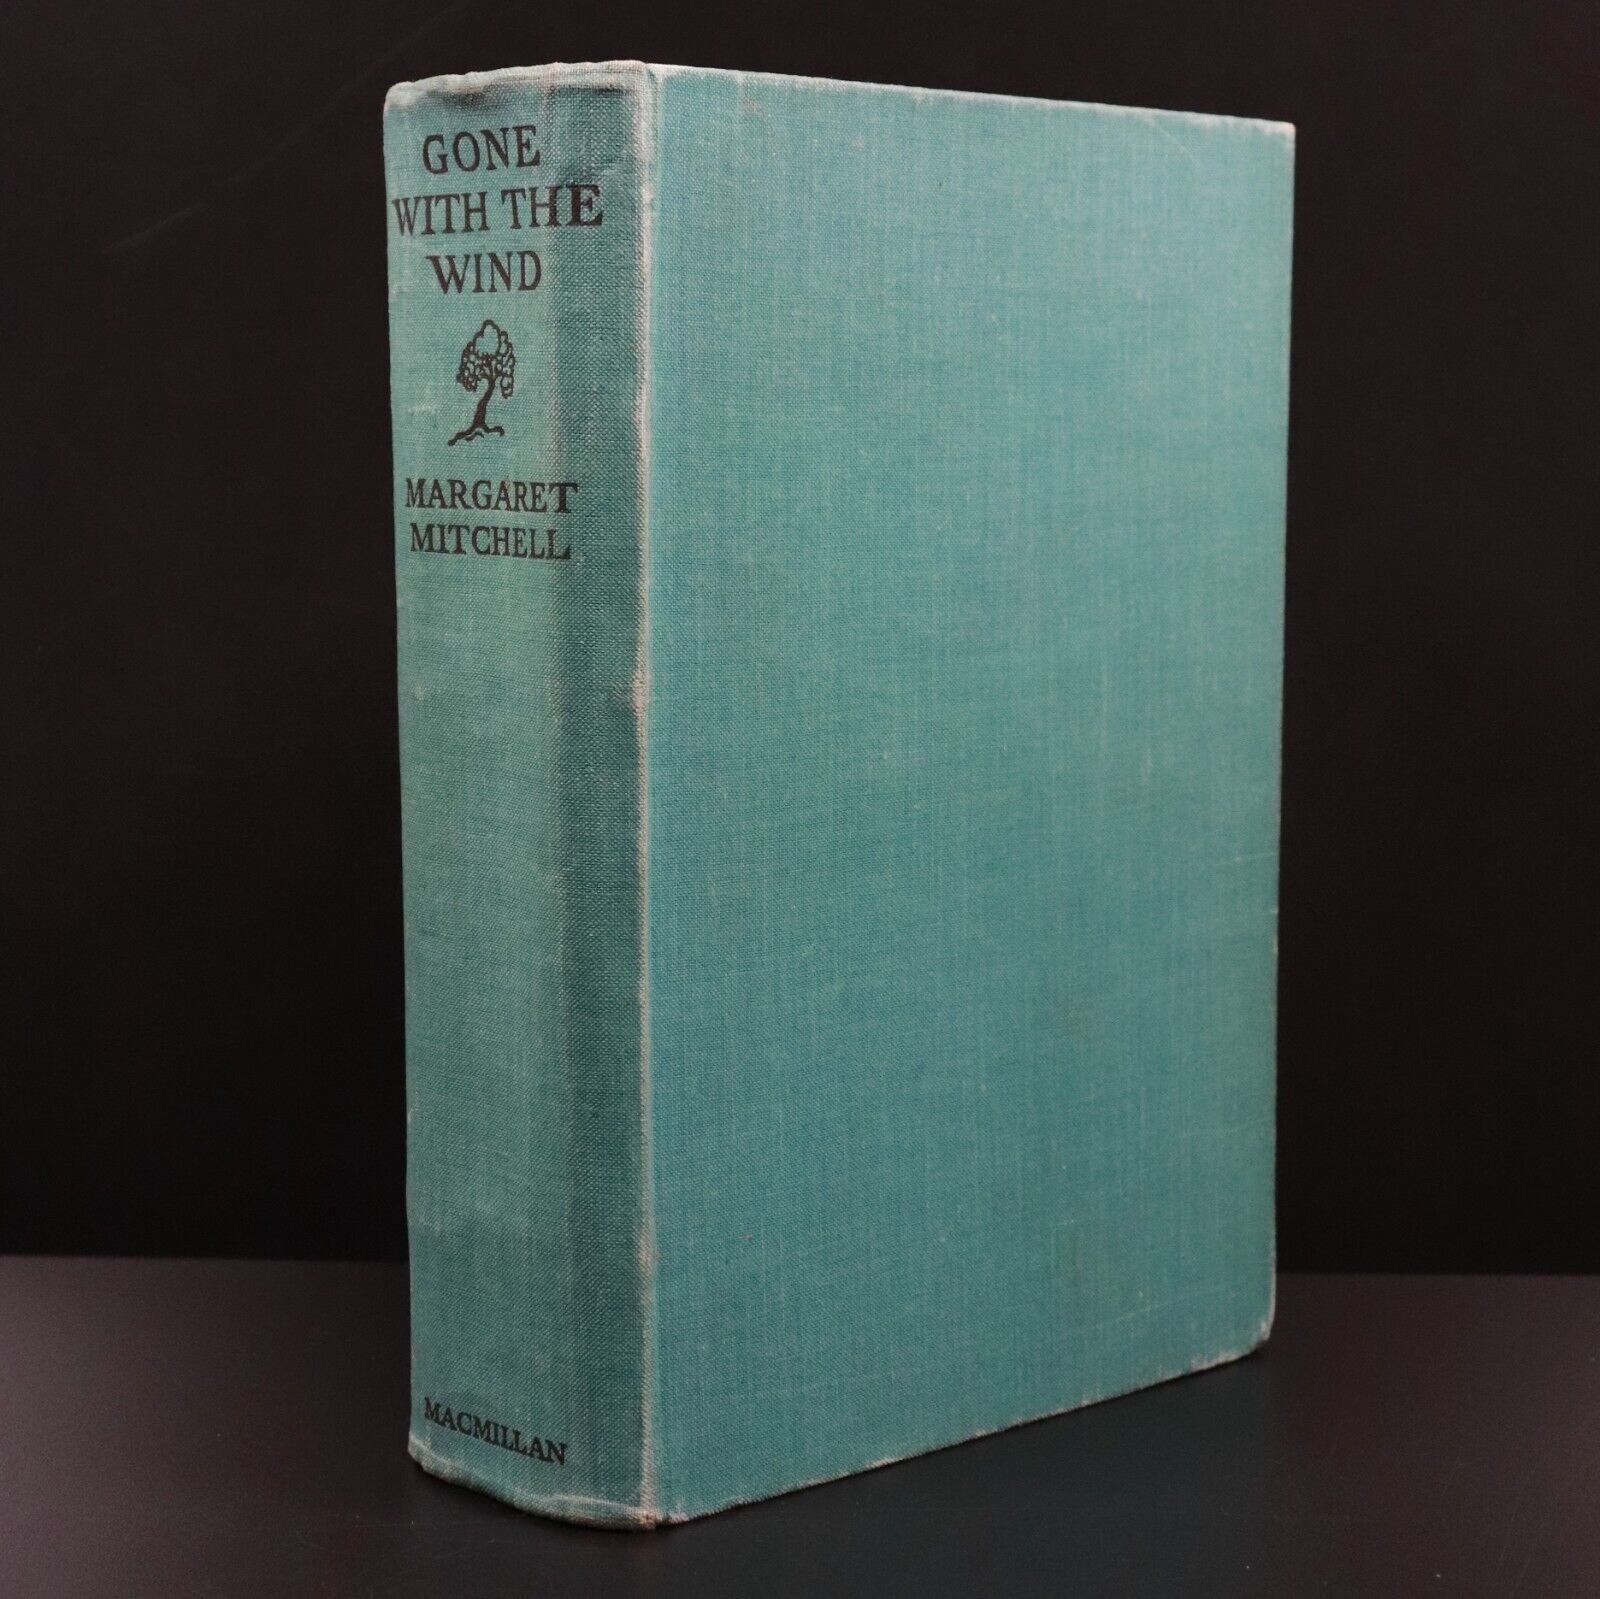 1937 Gone With The Wind by Margaret Mitchell Antique Classic Fiction Book